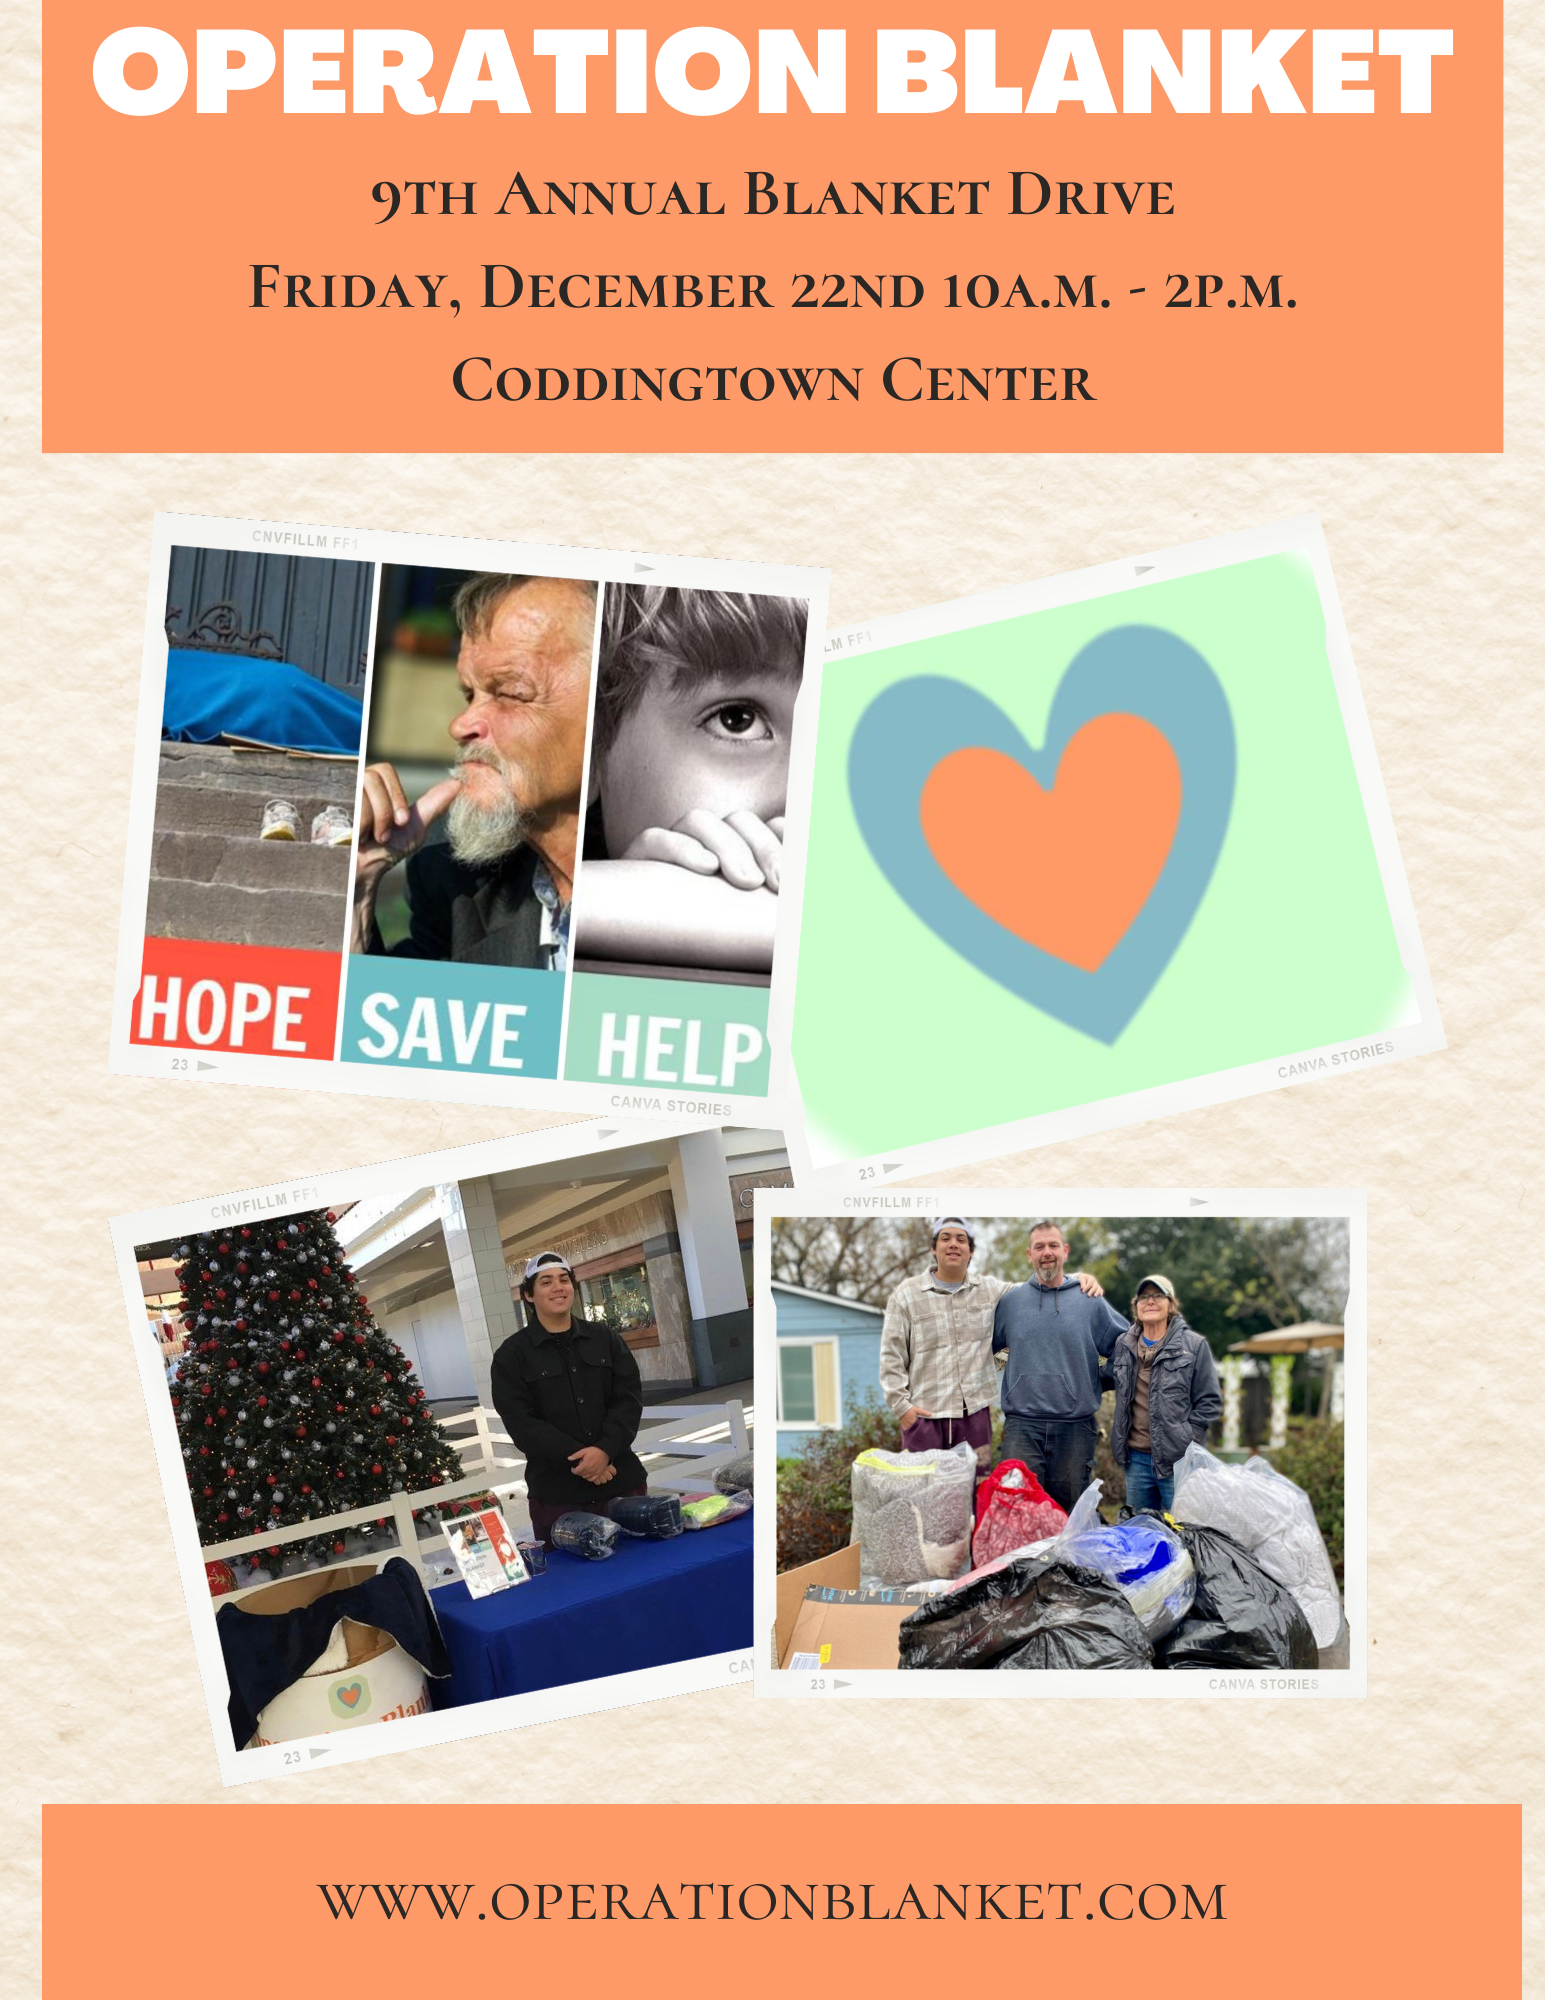 Operation Blanket 9th Annual Blanket Drive Friday, December 22nd 10am-2pm Coddingtown Center www.operationblanket.com